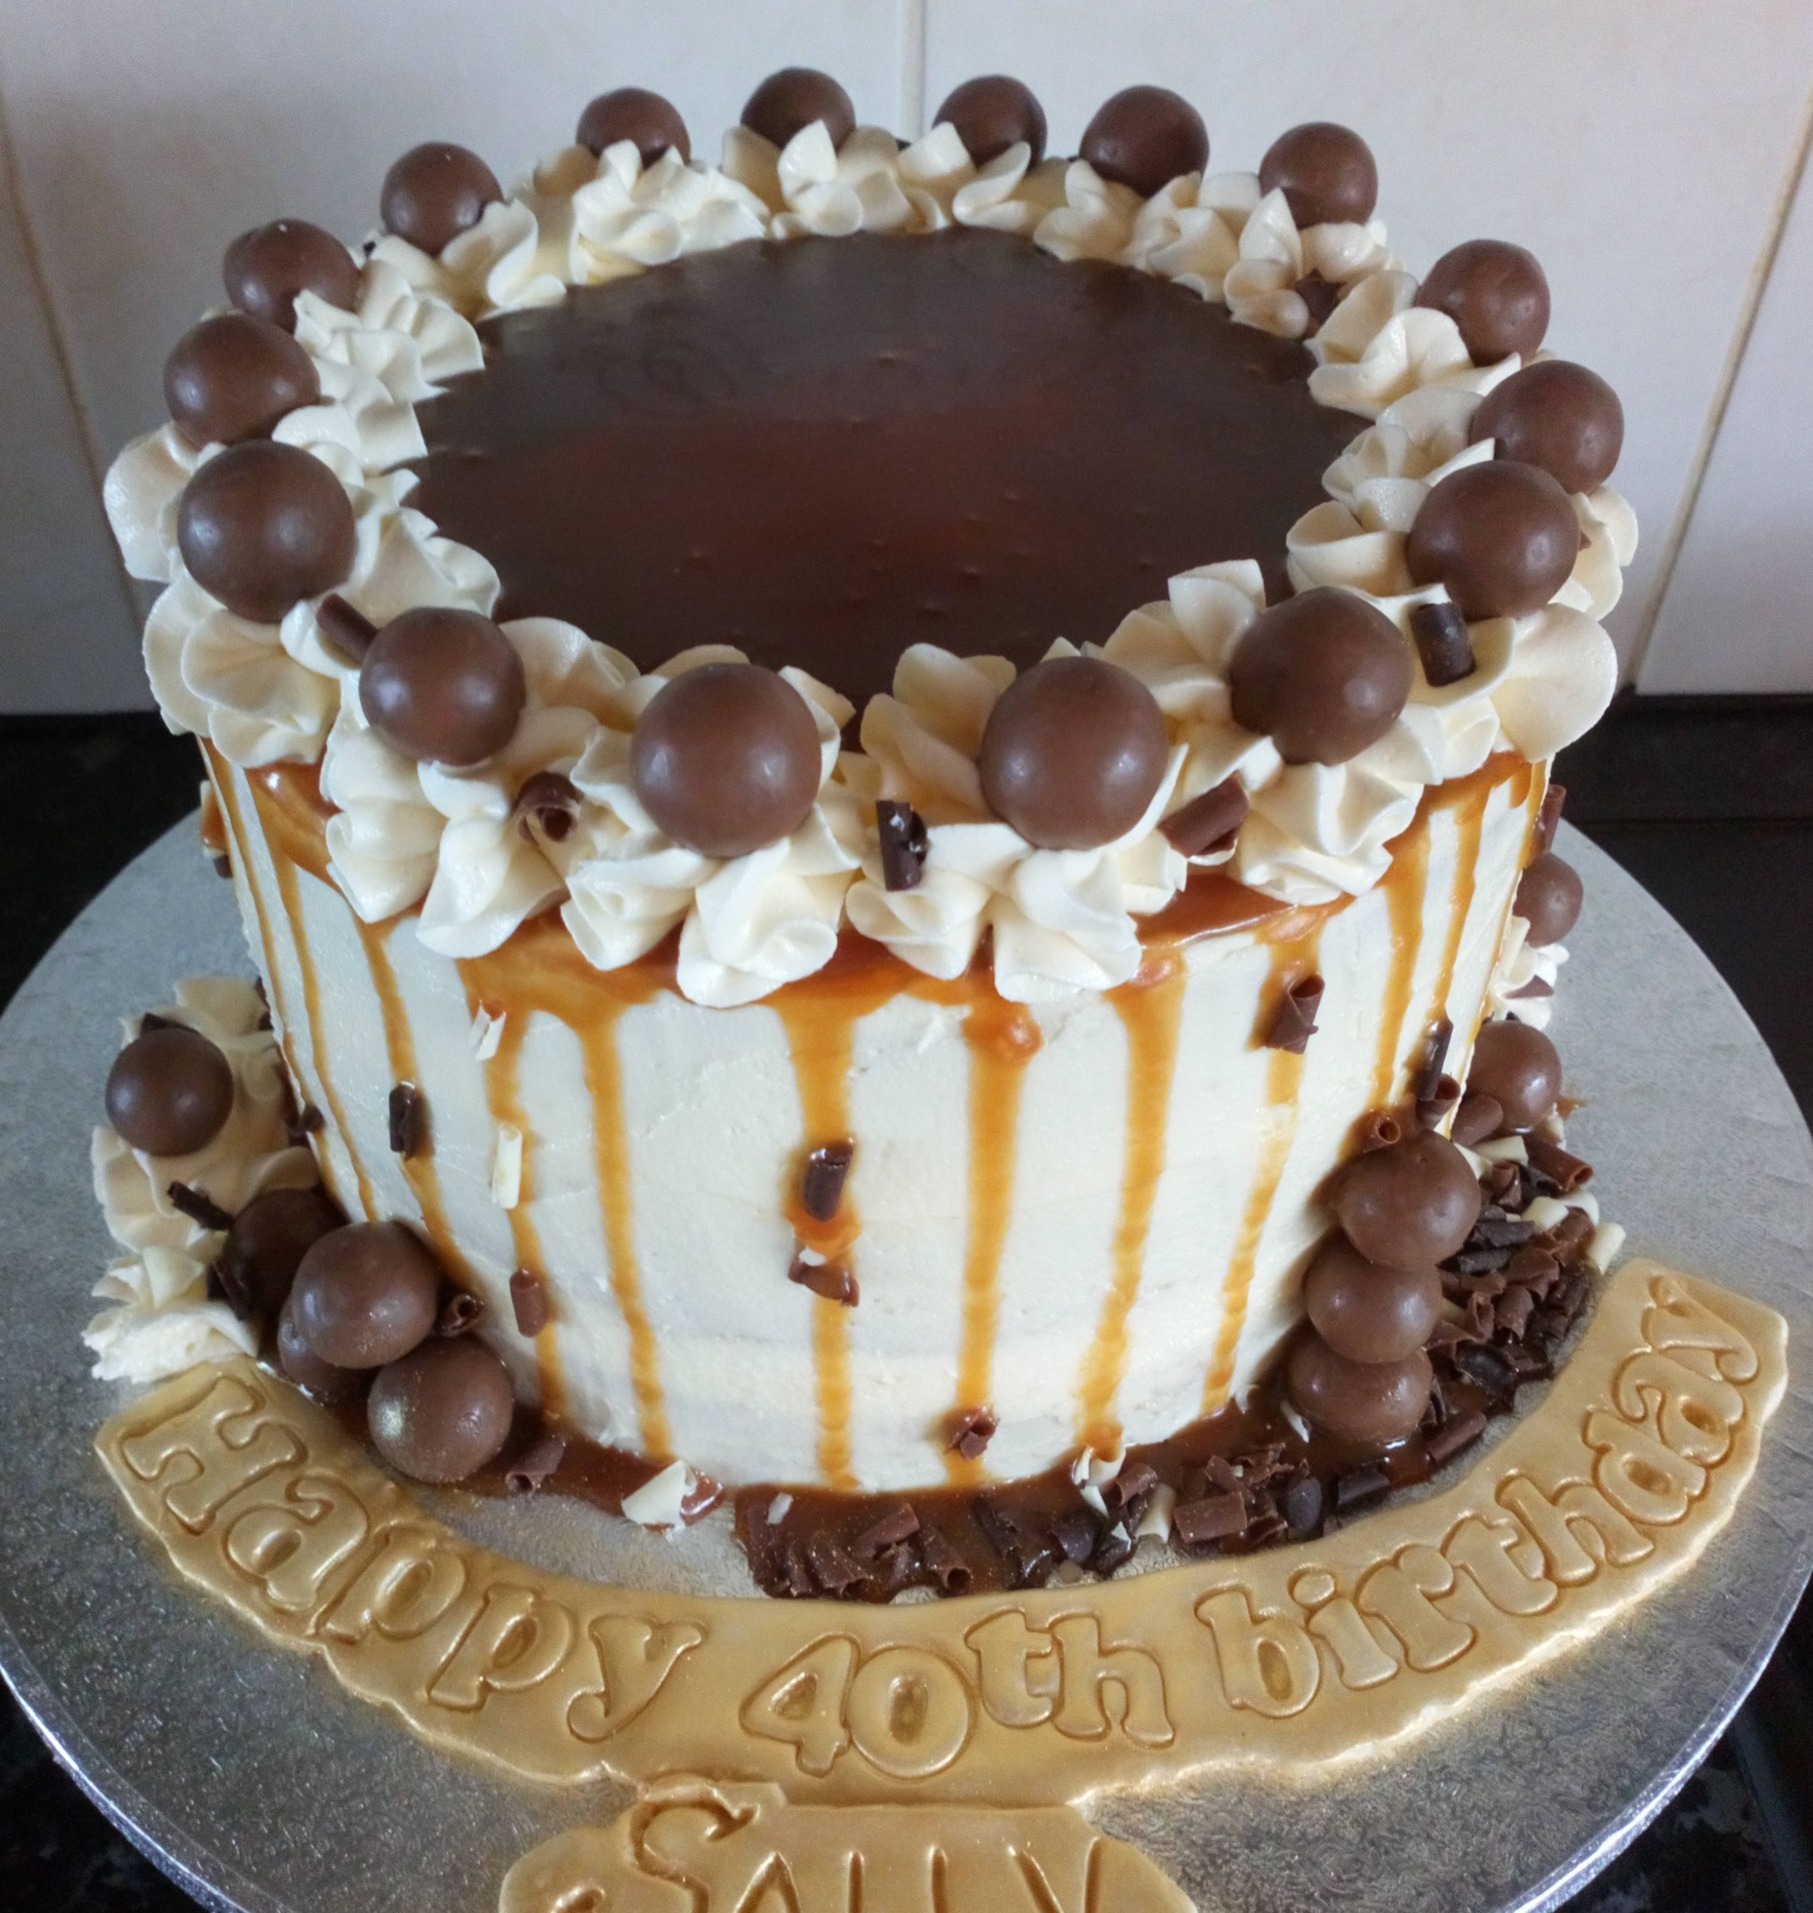 Salted caramel drip cake with maltesers